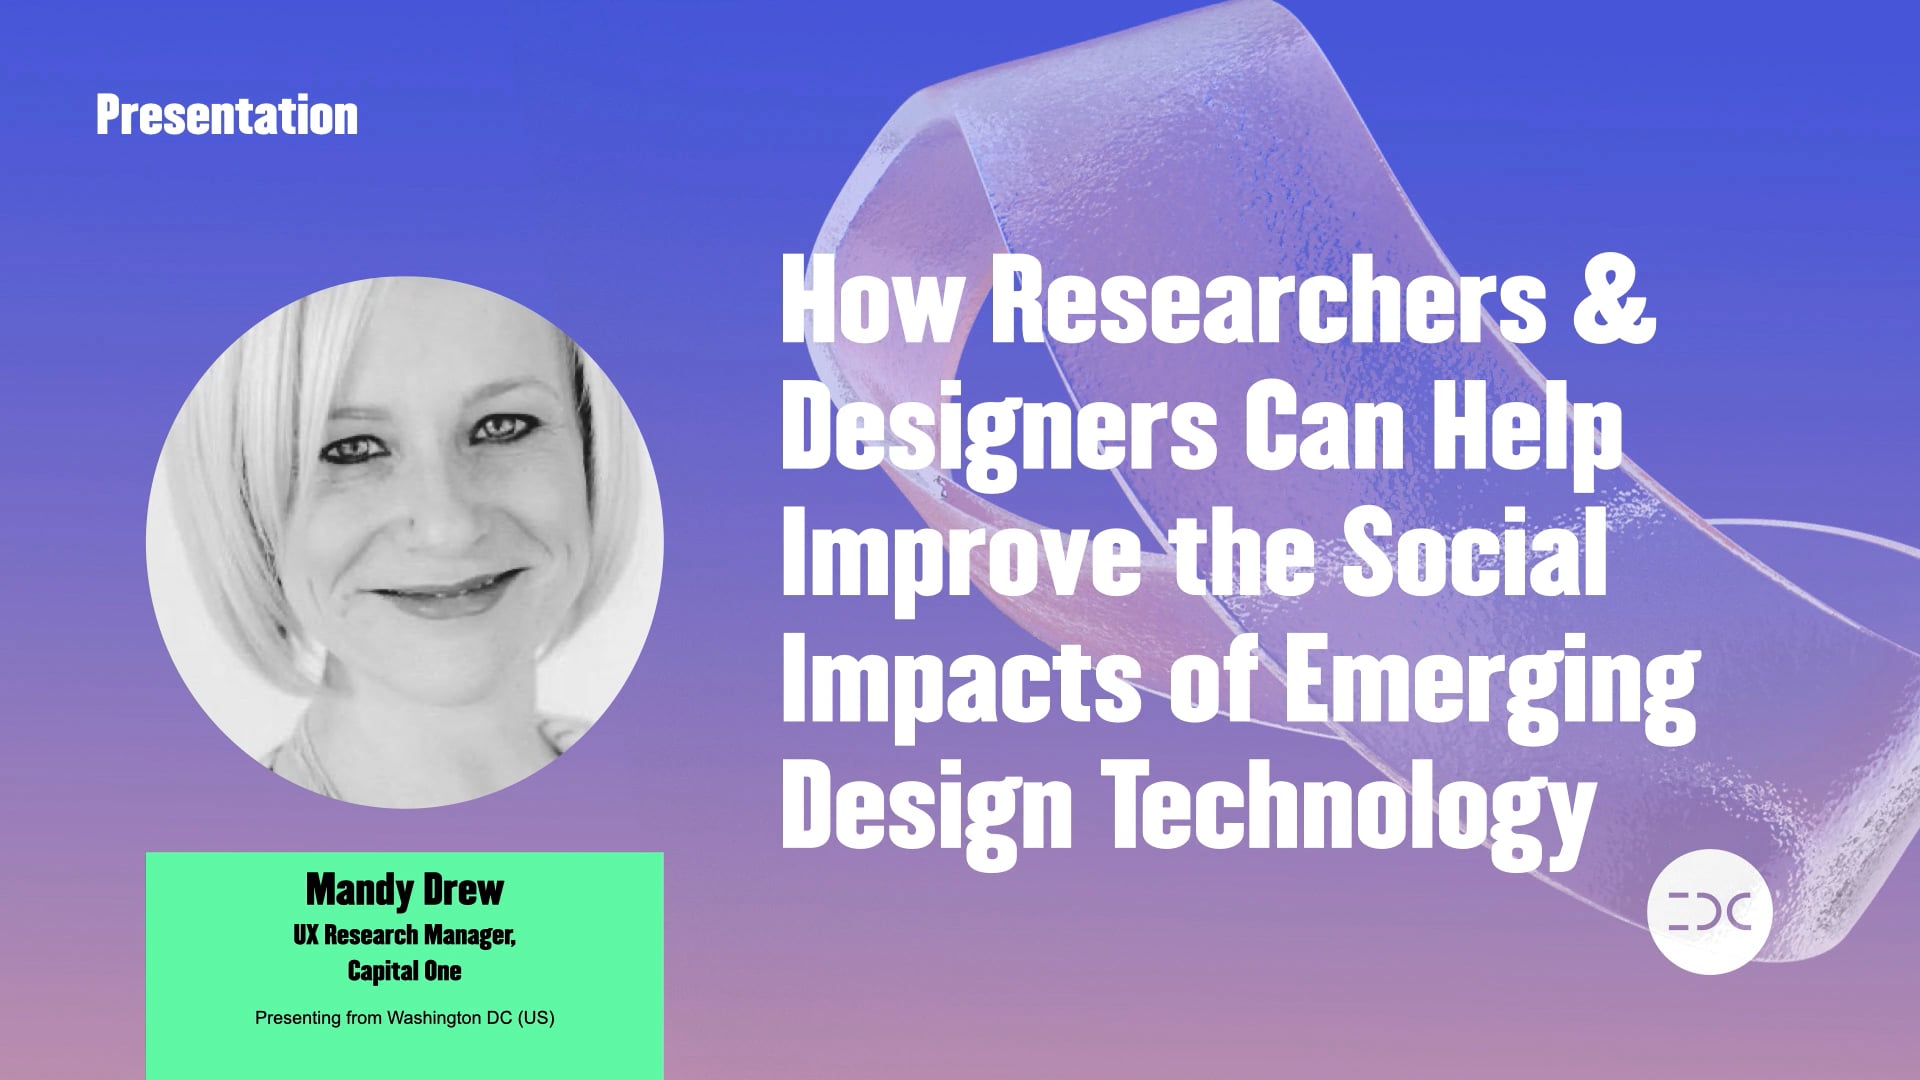 IDC 2021 - Mandy Drew - How Researchers & Designers Can Help Improve the Social Impacts of Emerging Design Technology